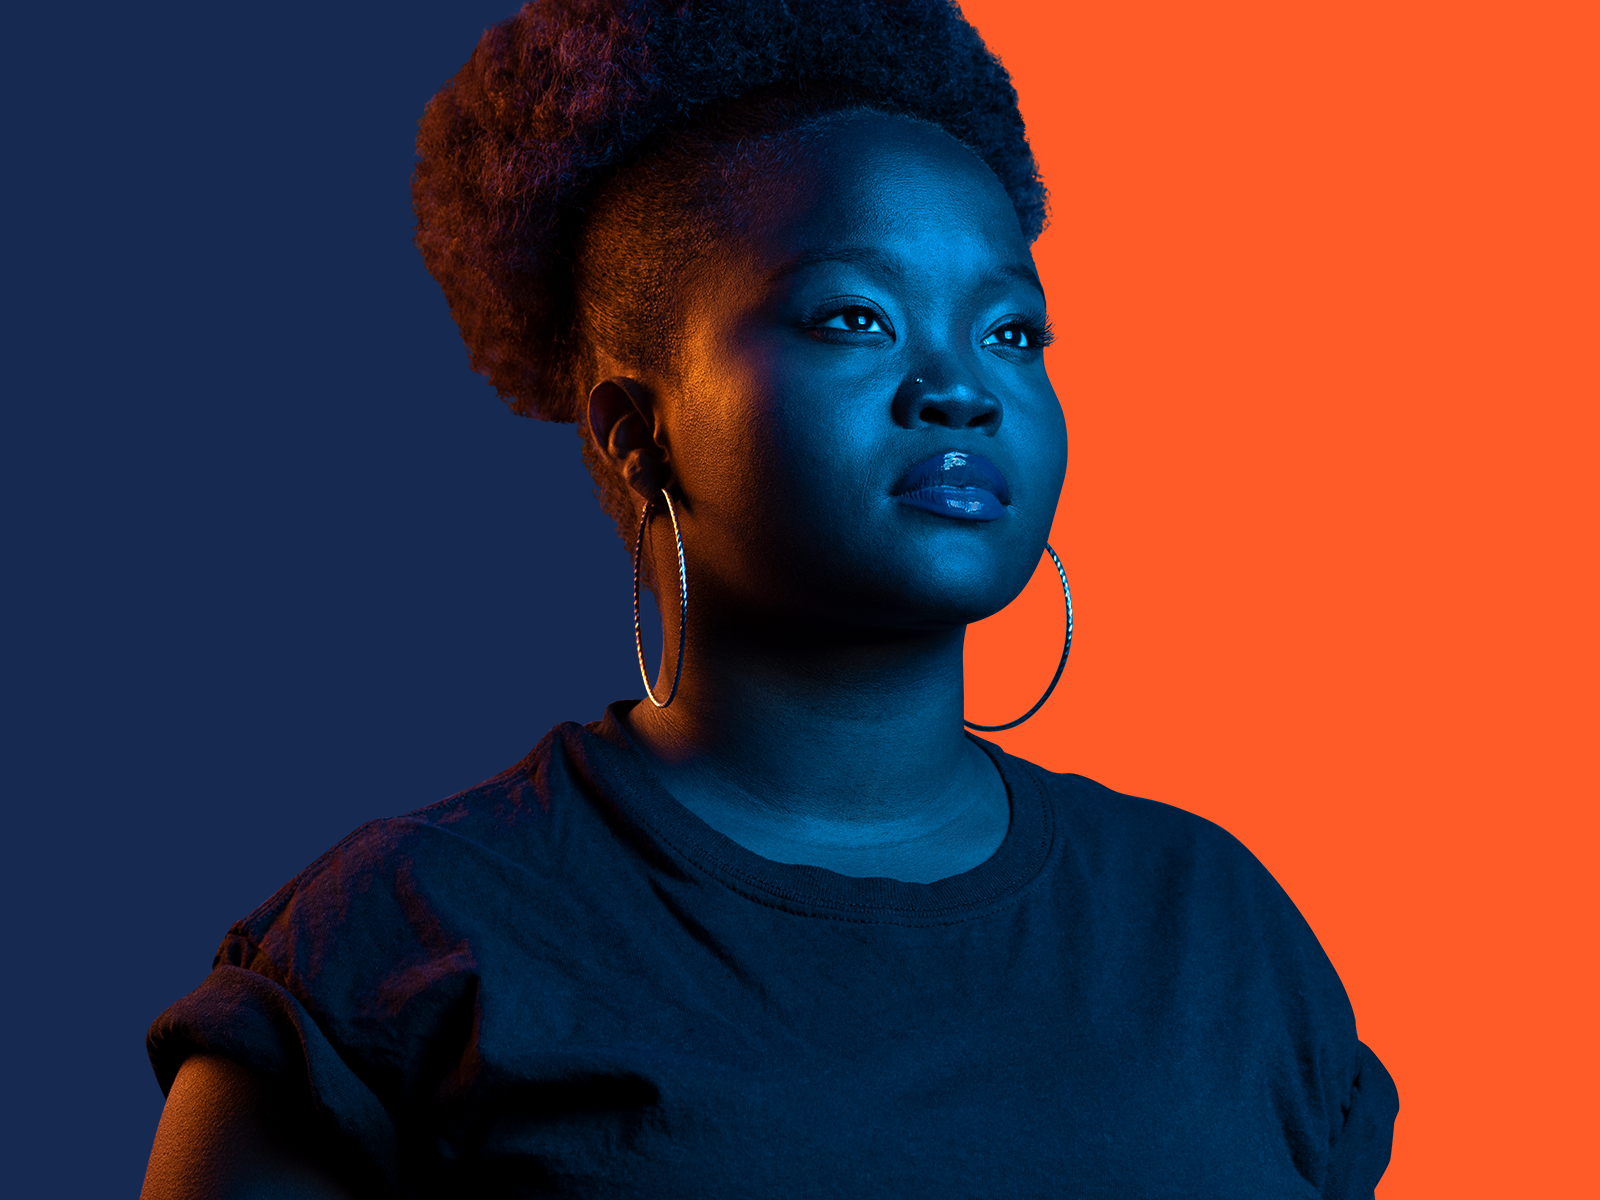 A Black woman stands against a blue and orange backdrop, with orange light against the blue side and blue light against the orange side.